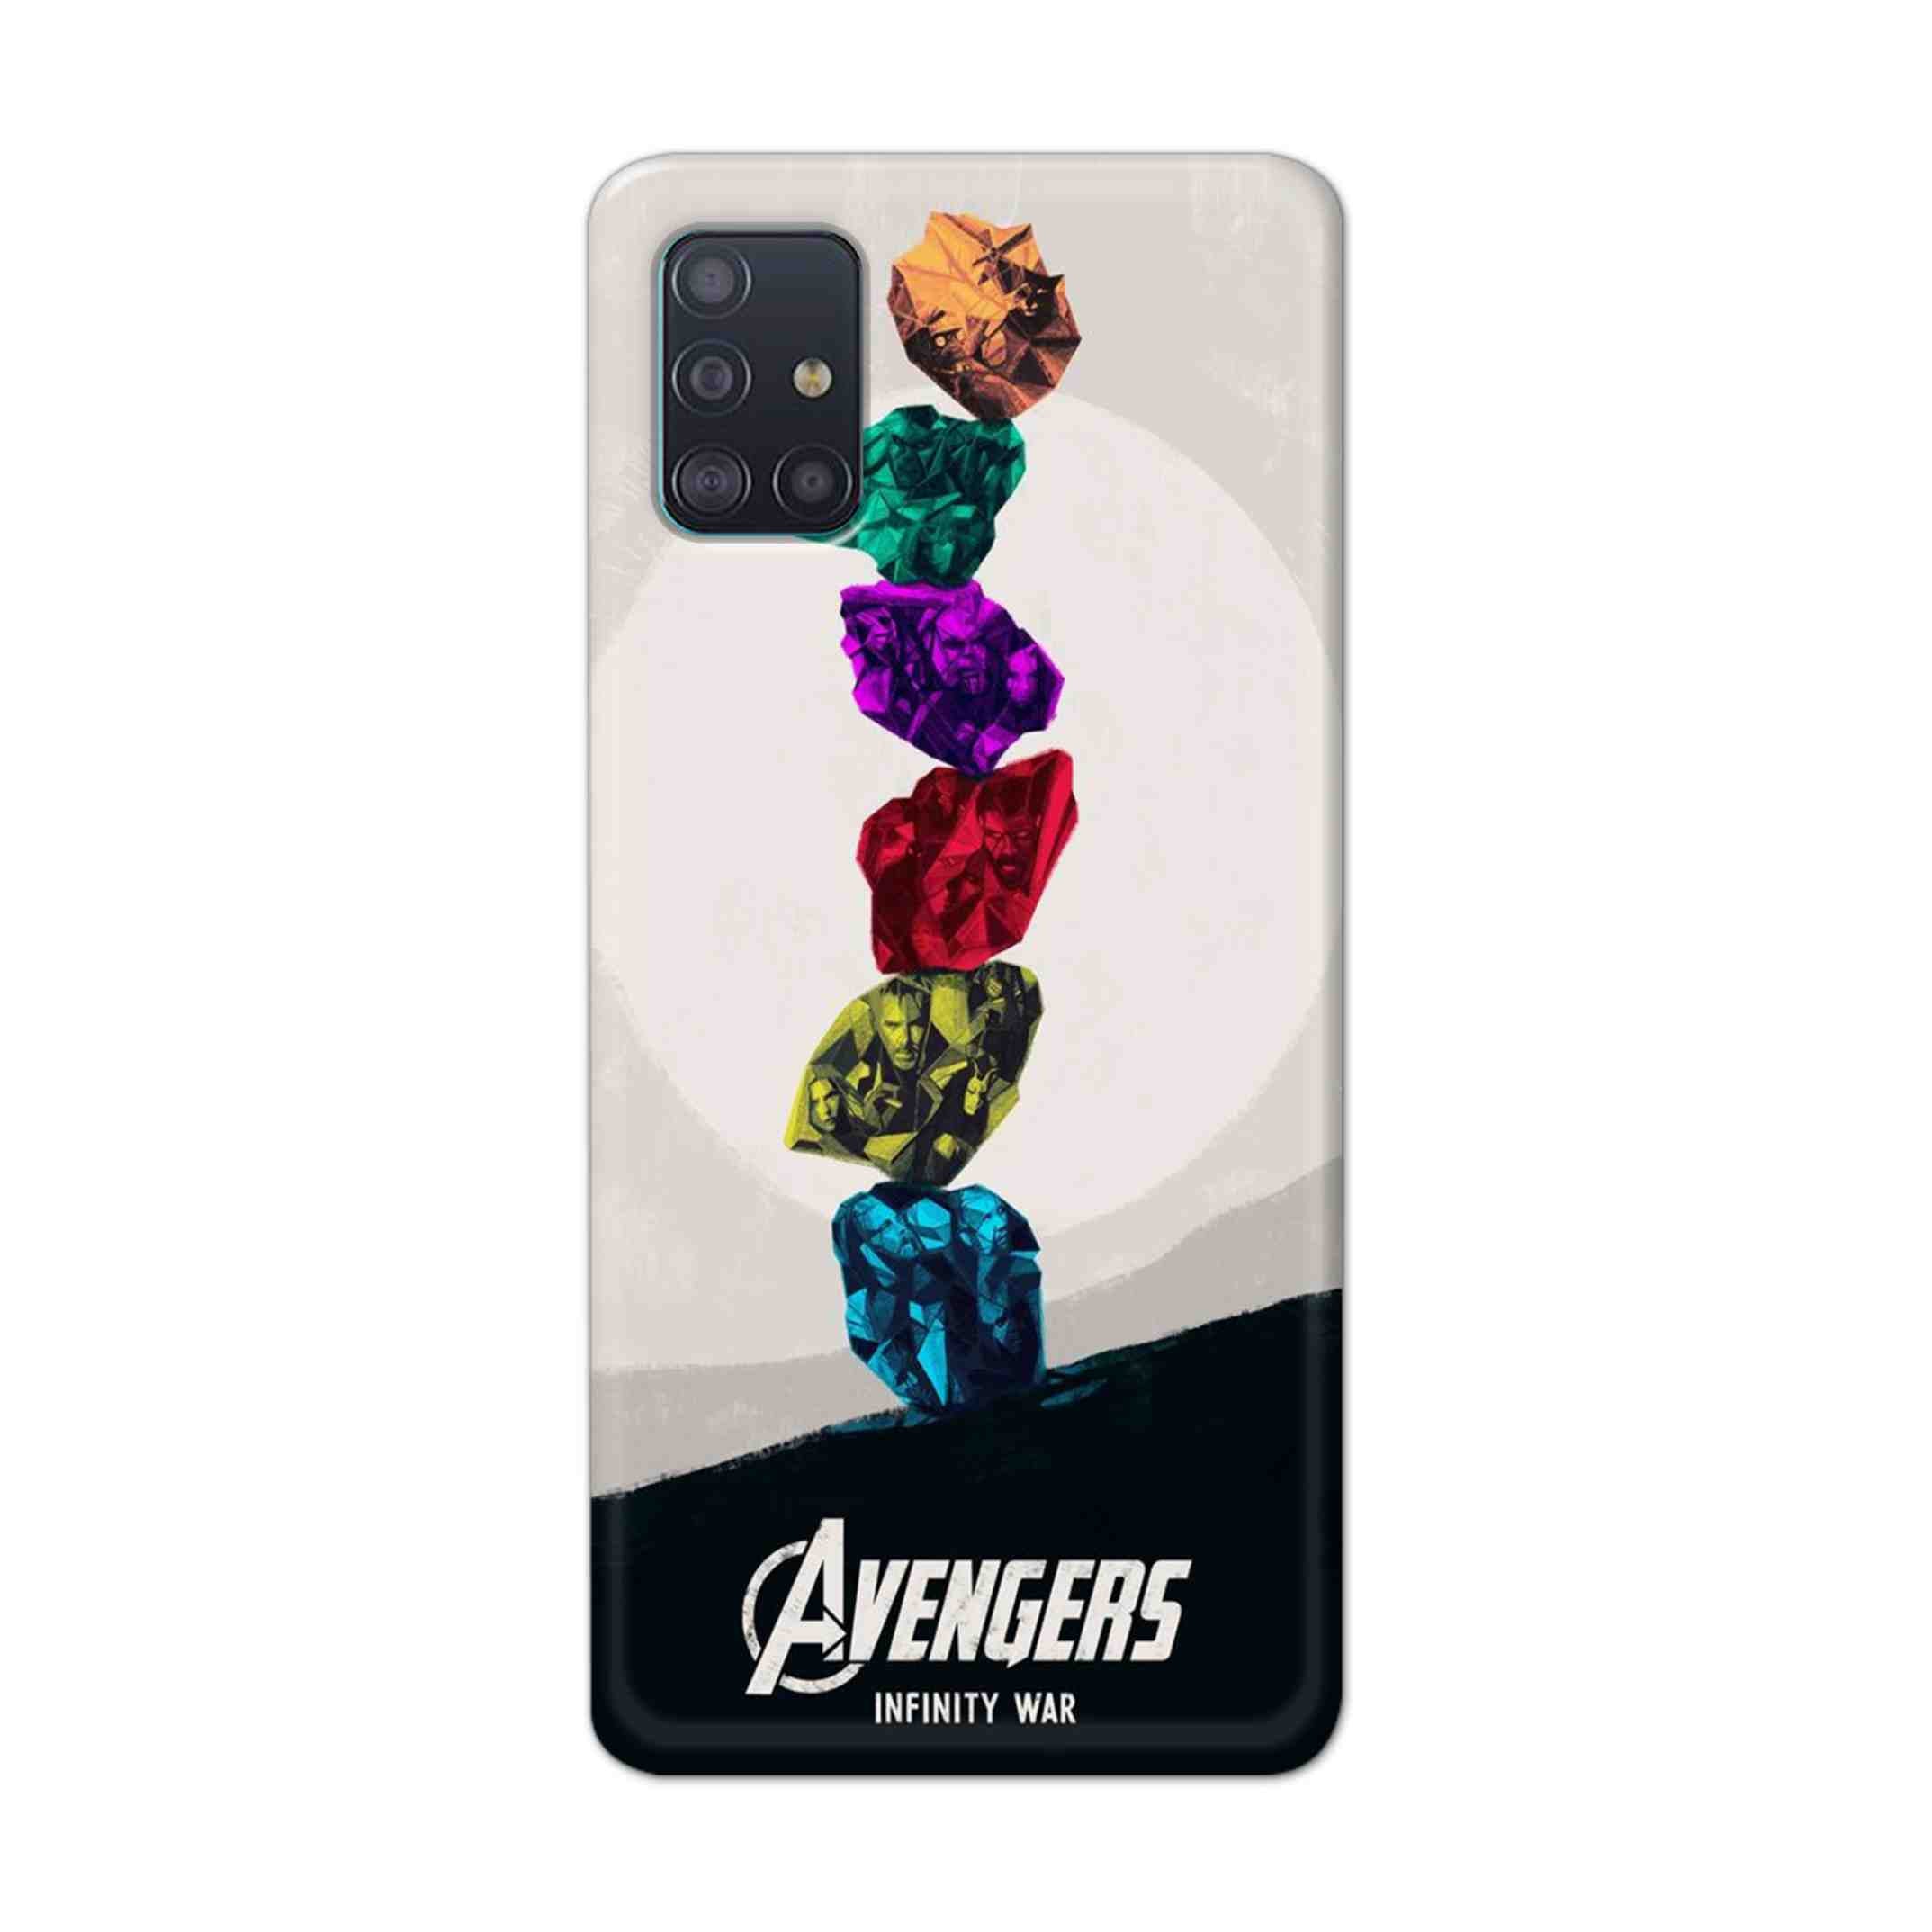 Buy Avengers Stone Hard Back Mobile Phone Case Cover For Samsung Galaxy A71 Online